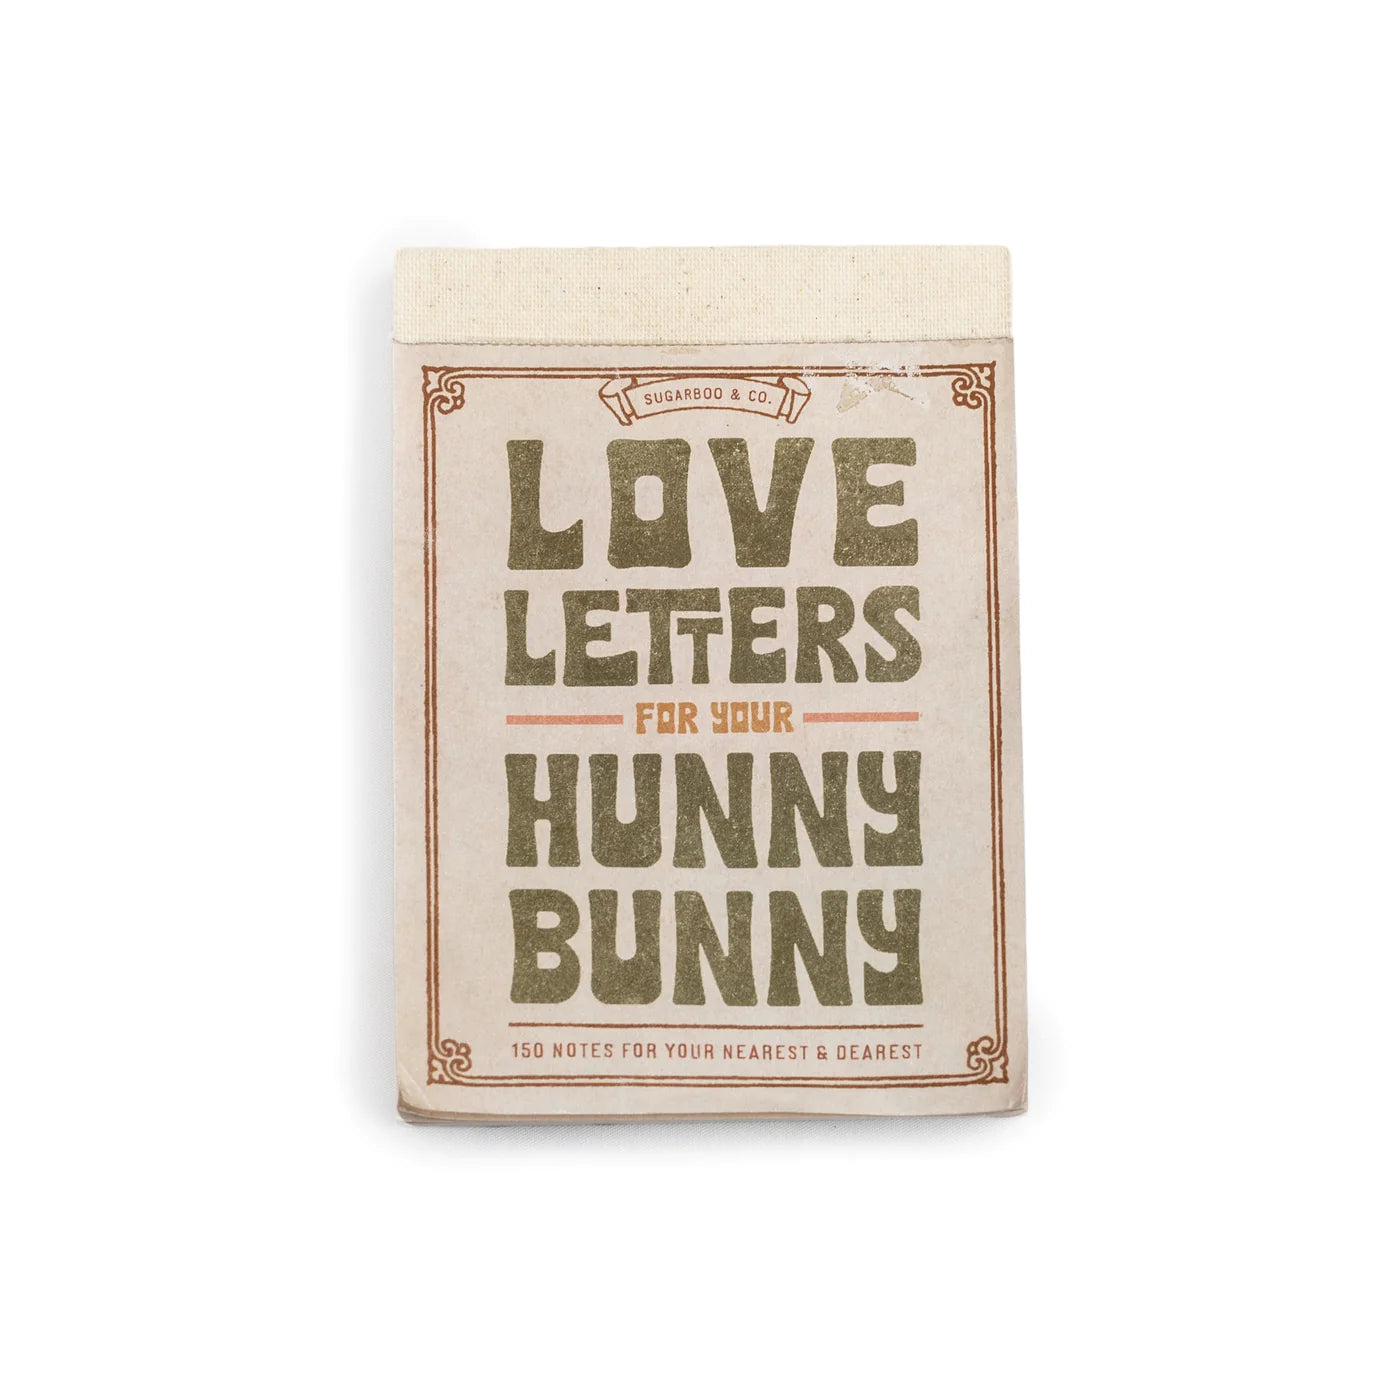 Letters for Your Hunny Bunny